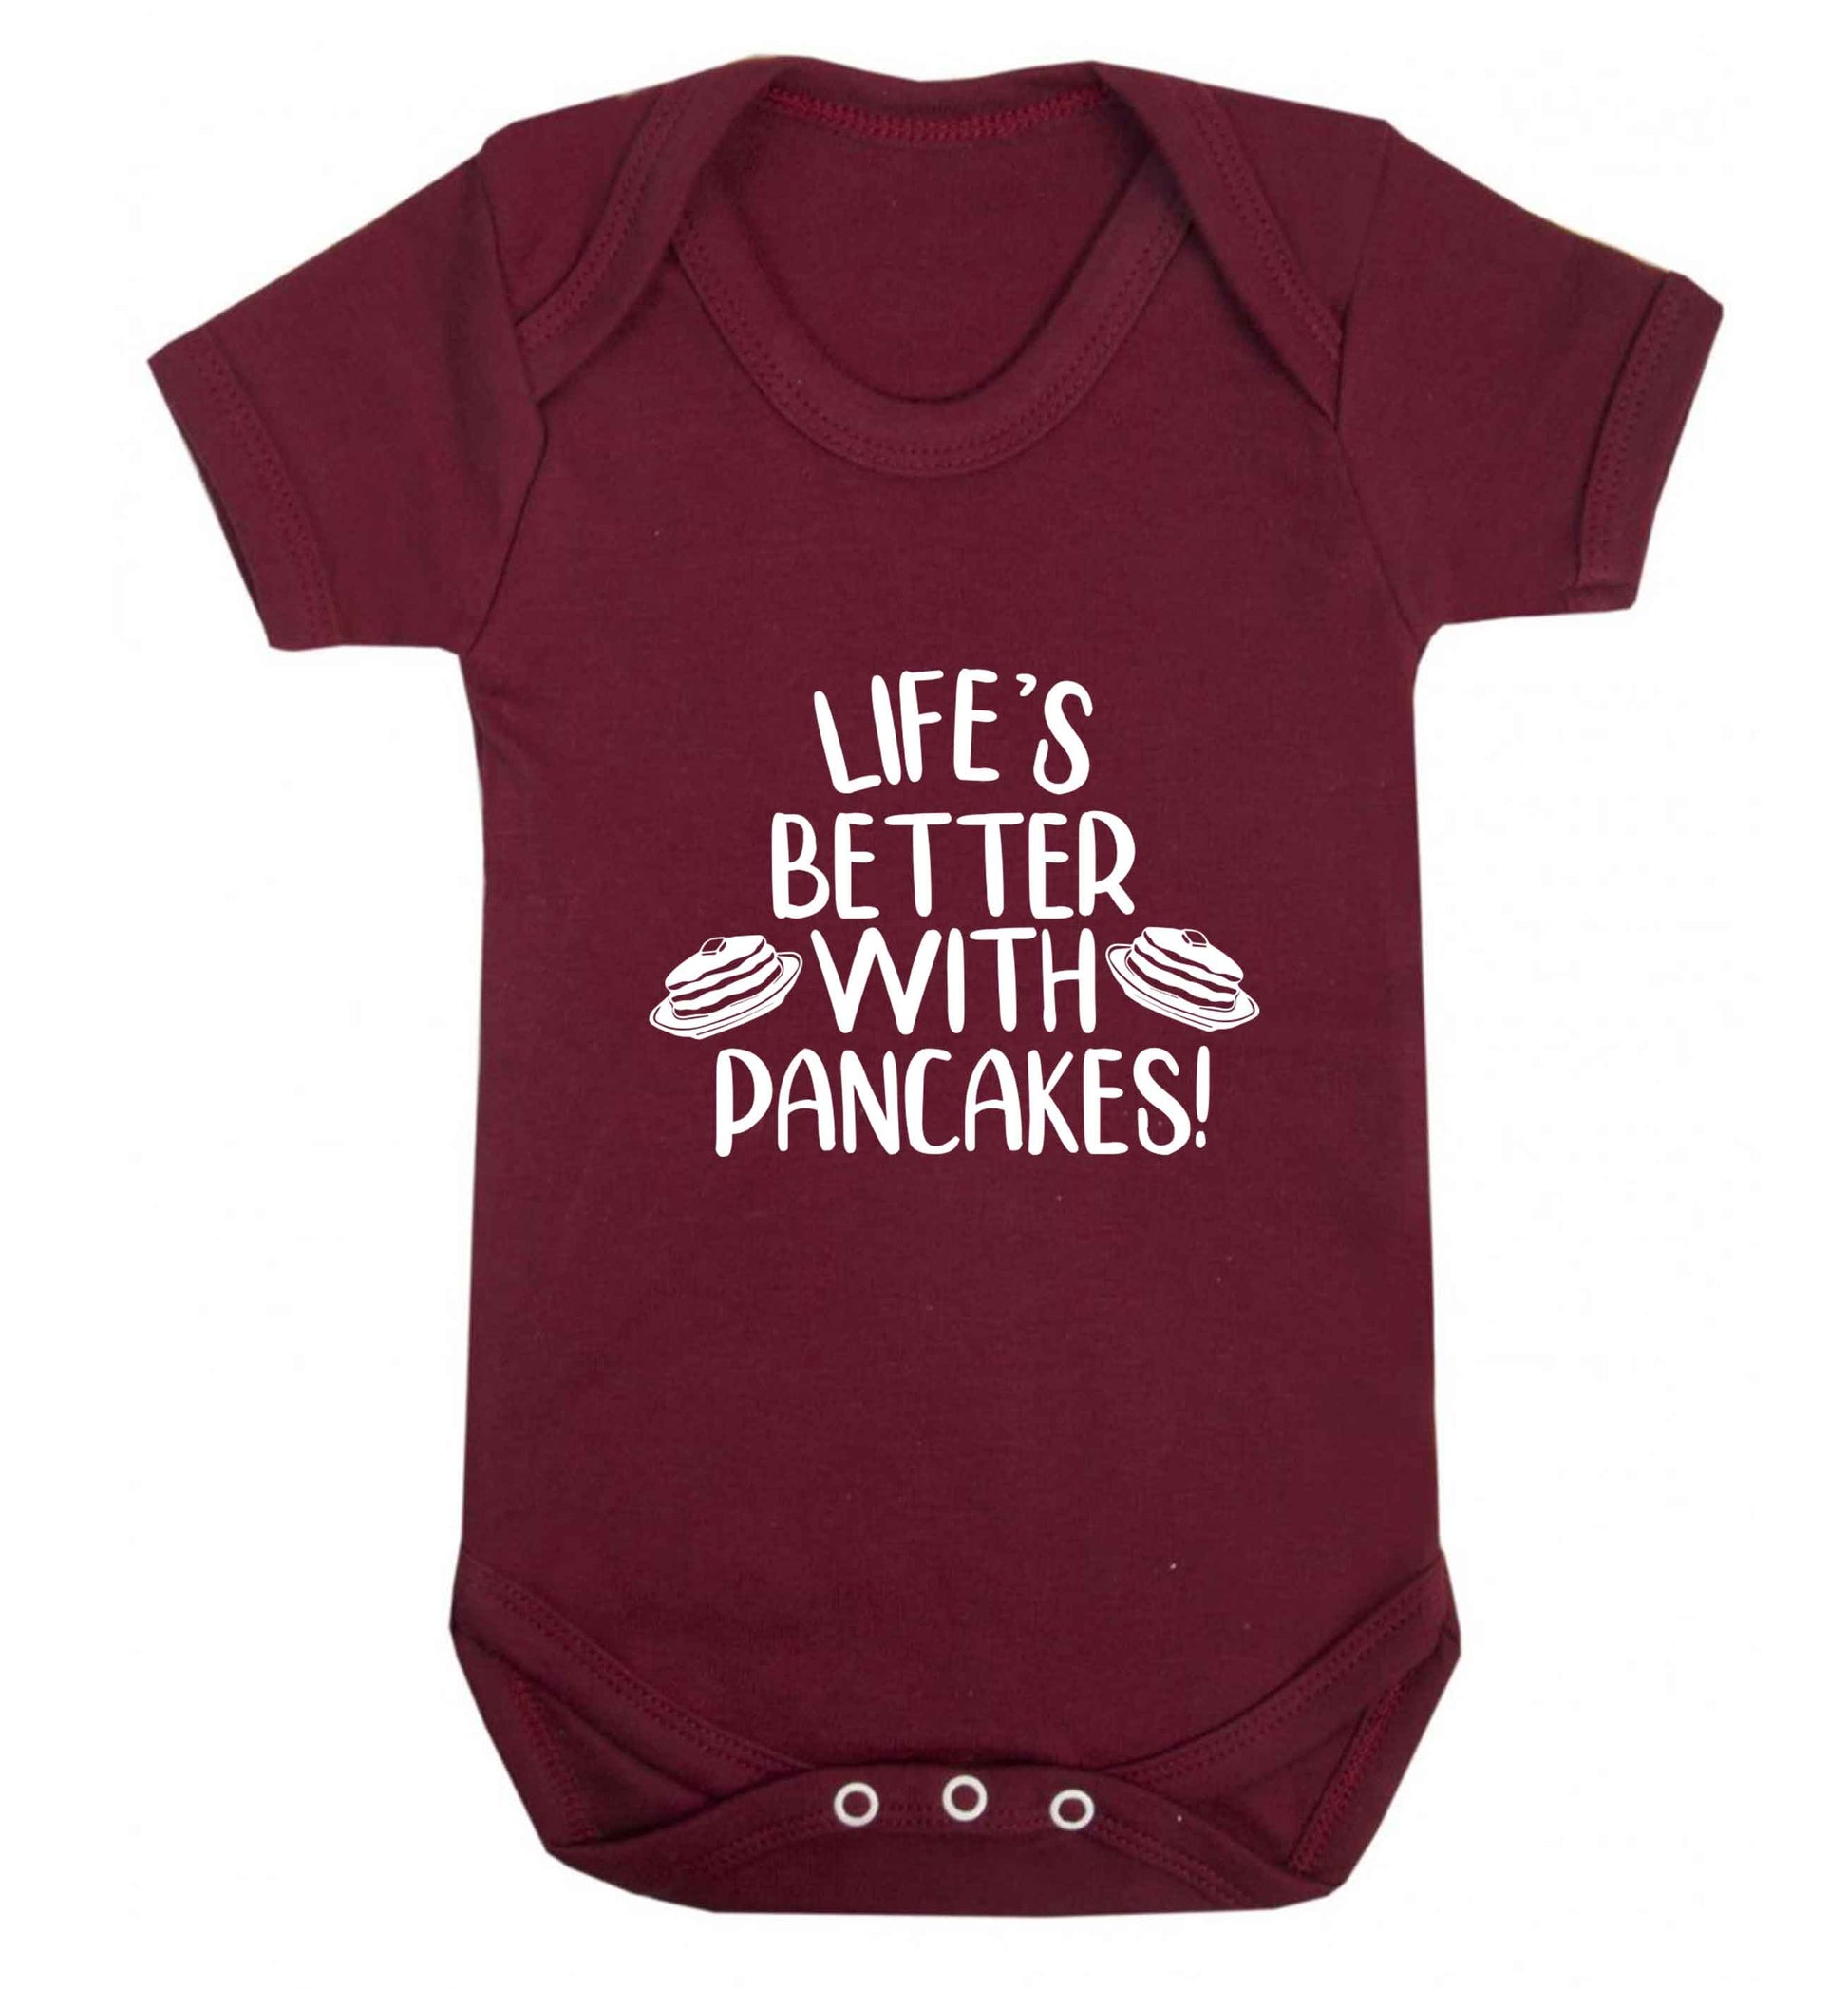 Life's better with pancakes baby vest maroon 18-24 months